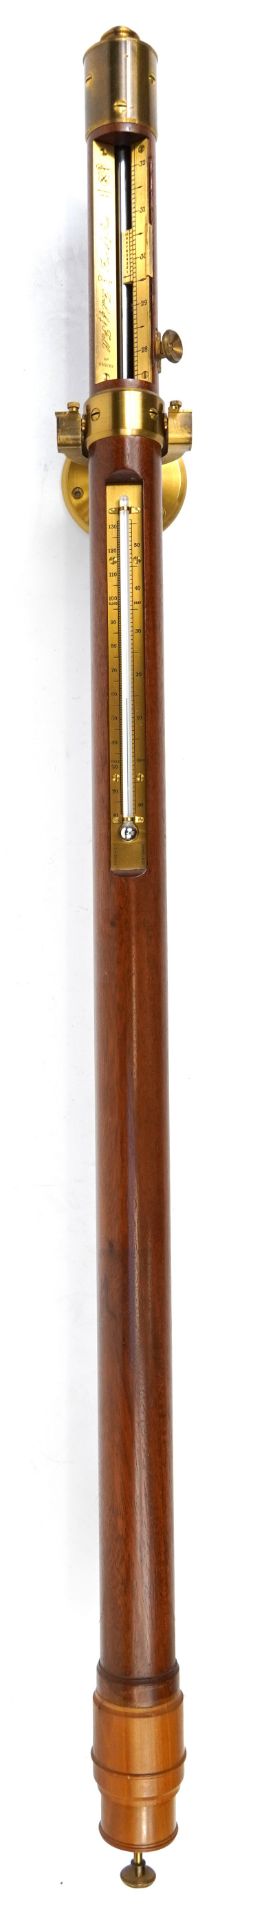 Mahogany and brass ship's stick barometer by Culpeper Instruments numbered 059/82, 96.5cm in length